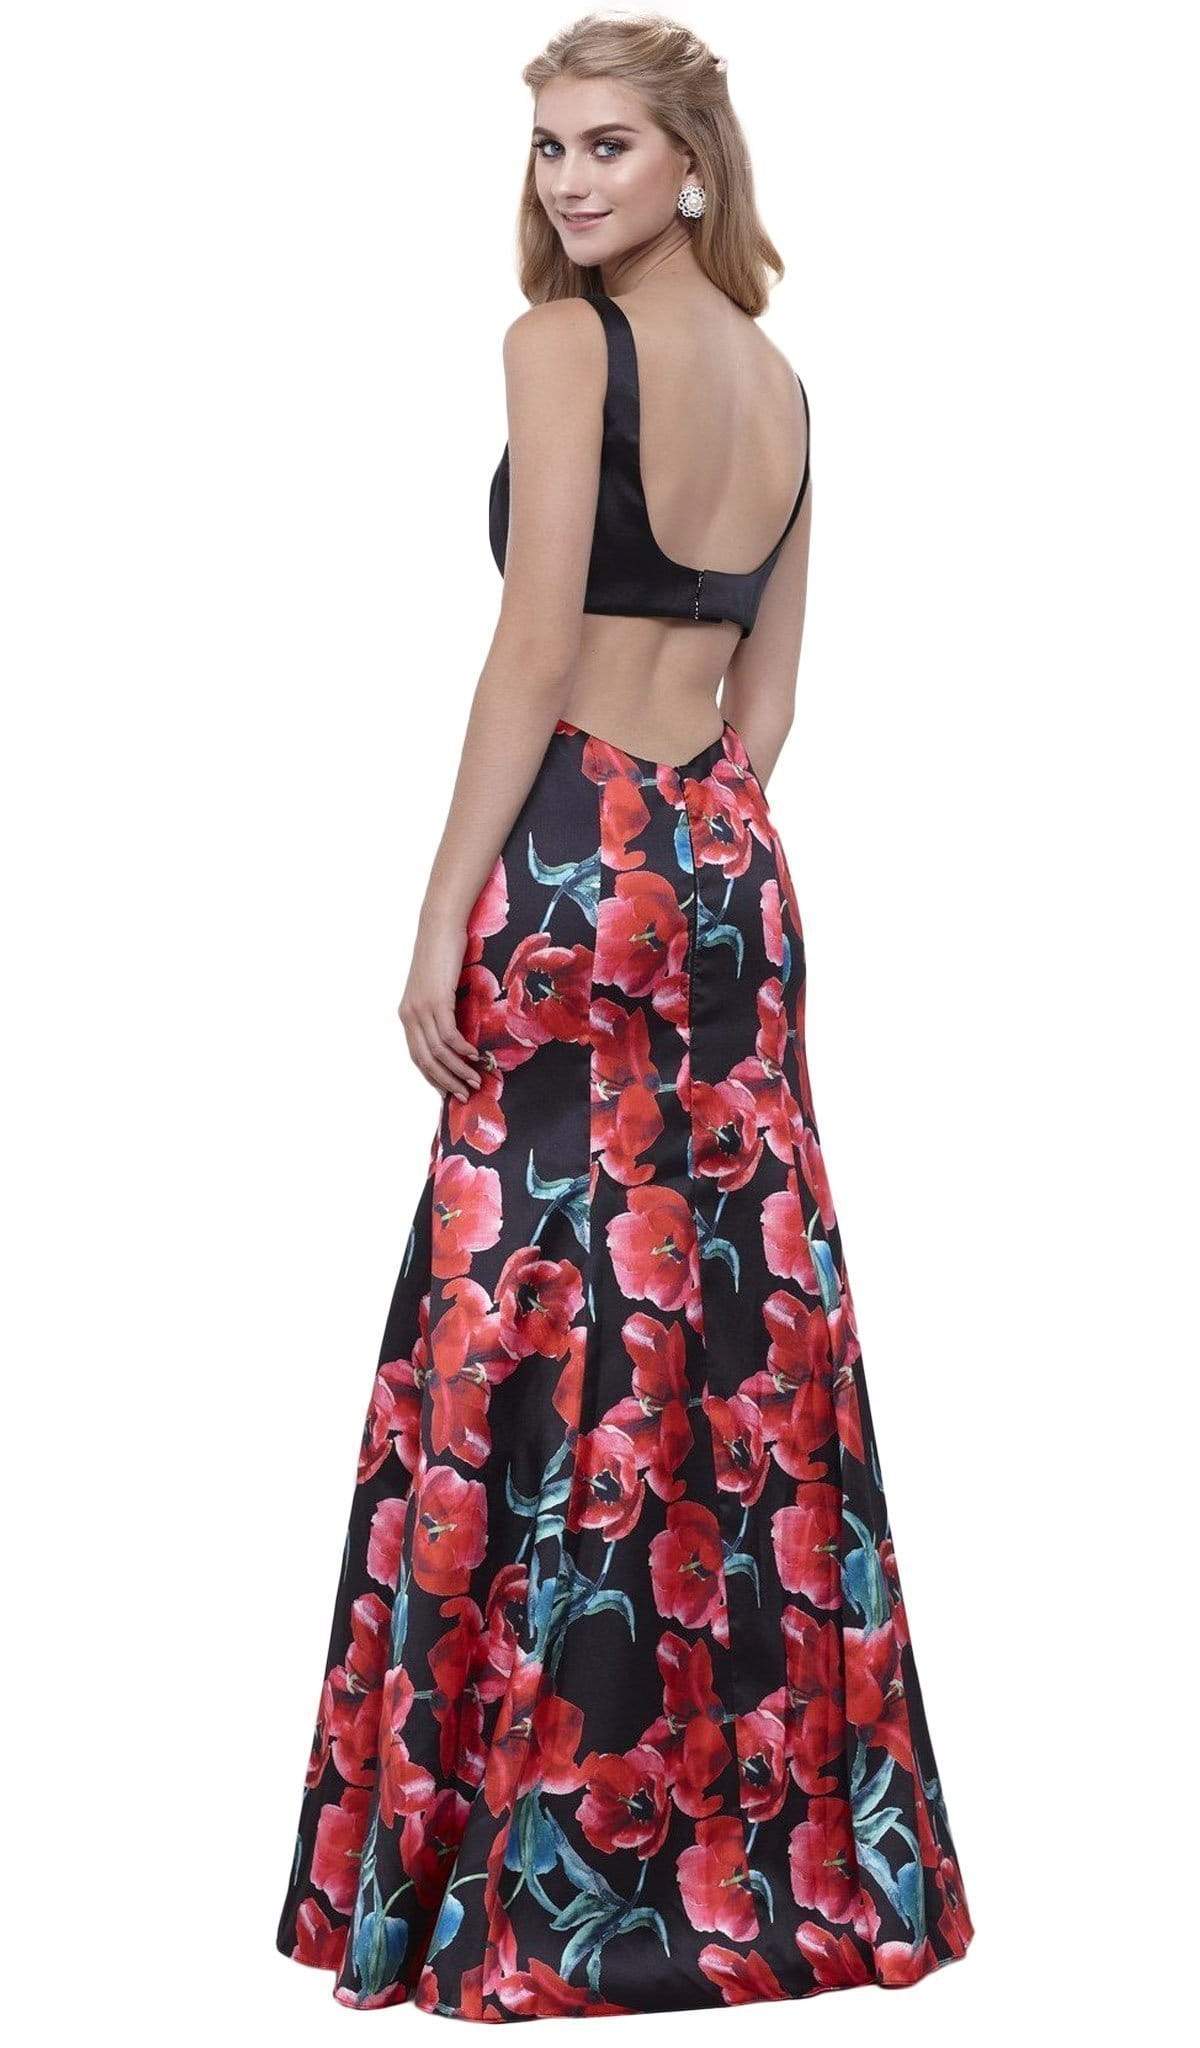 Nox Anabel - 8354 Sleeveless Floral Print Trumpet Evening Dress Special Occasion Dress